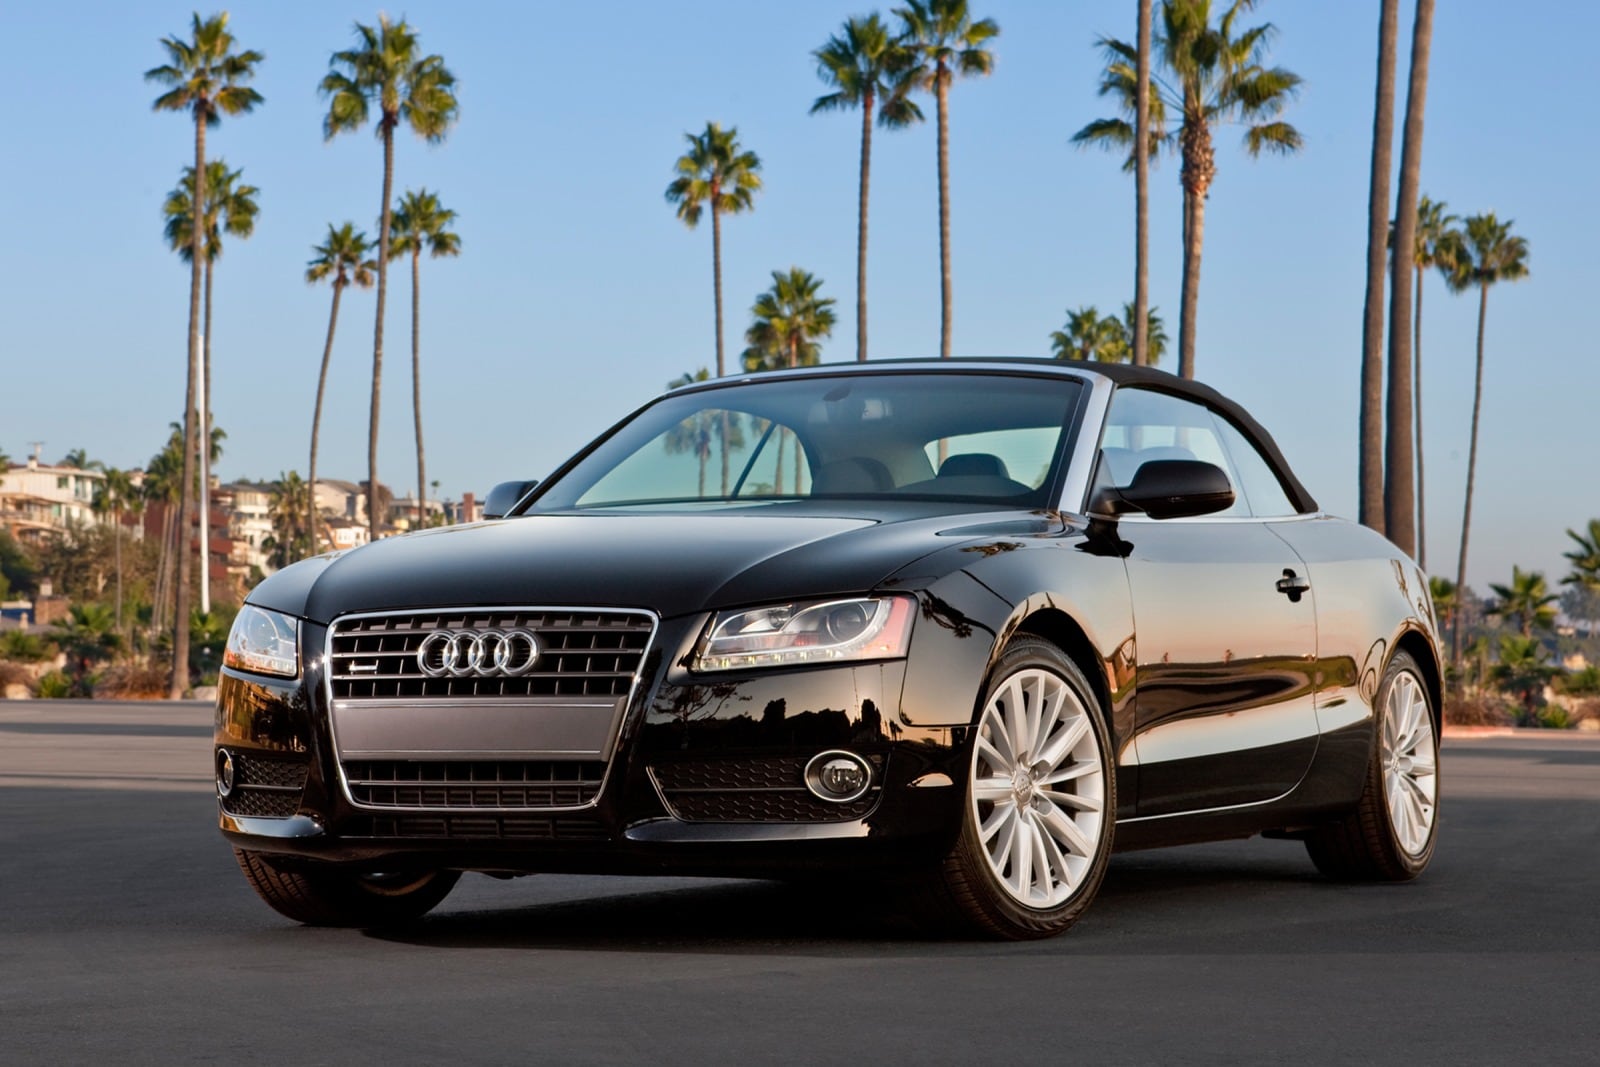 Used 2011 Audi A5 Convertible Review | Edmunds